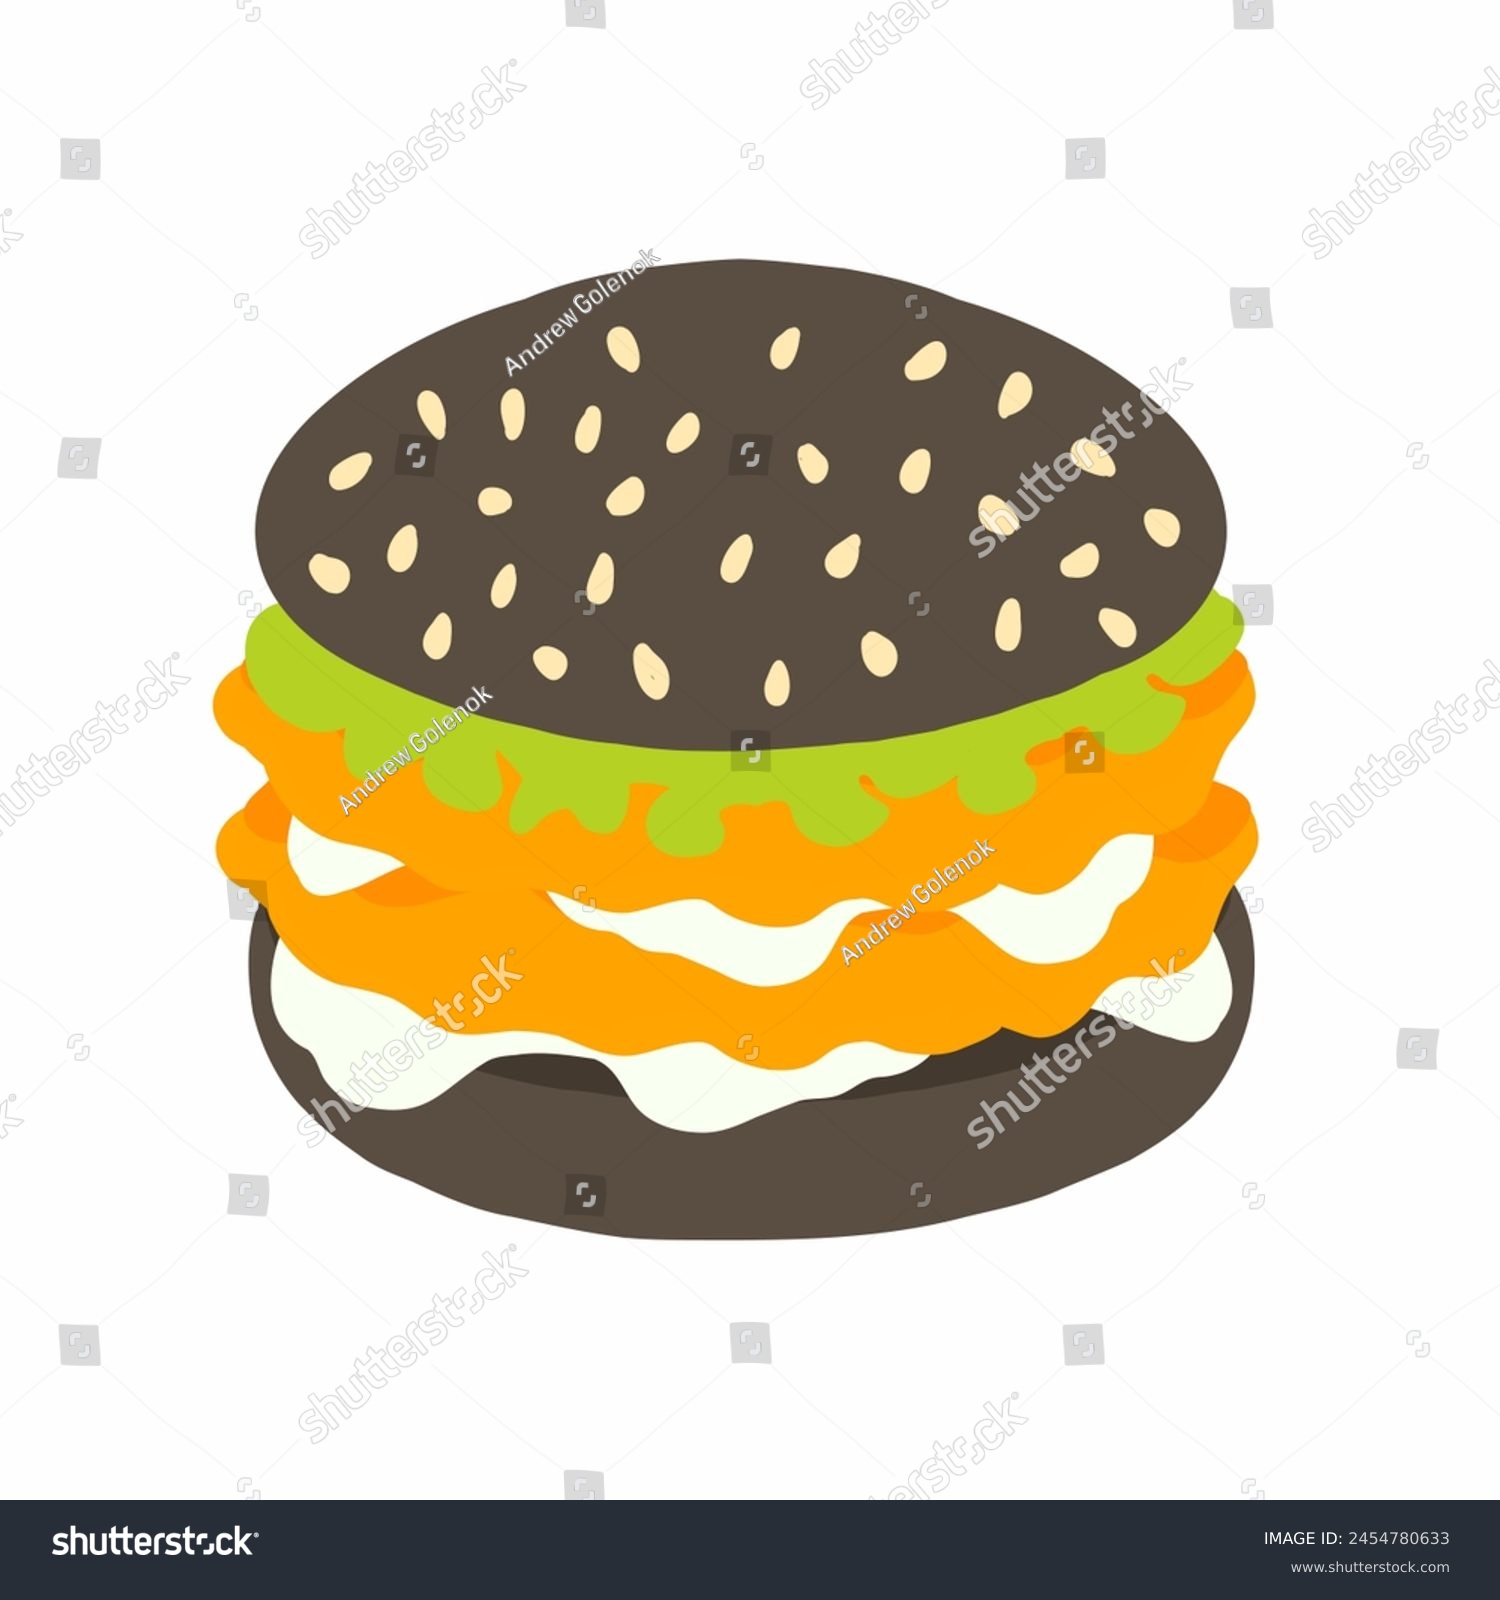 SVG of Burger with black bun, double chicken cutlets with sauce and fresh lettuce leaf icon in cartoon flat style. Vector illustration isolated on white background. For menu, poster, infographic, restaurant. svg